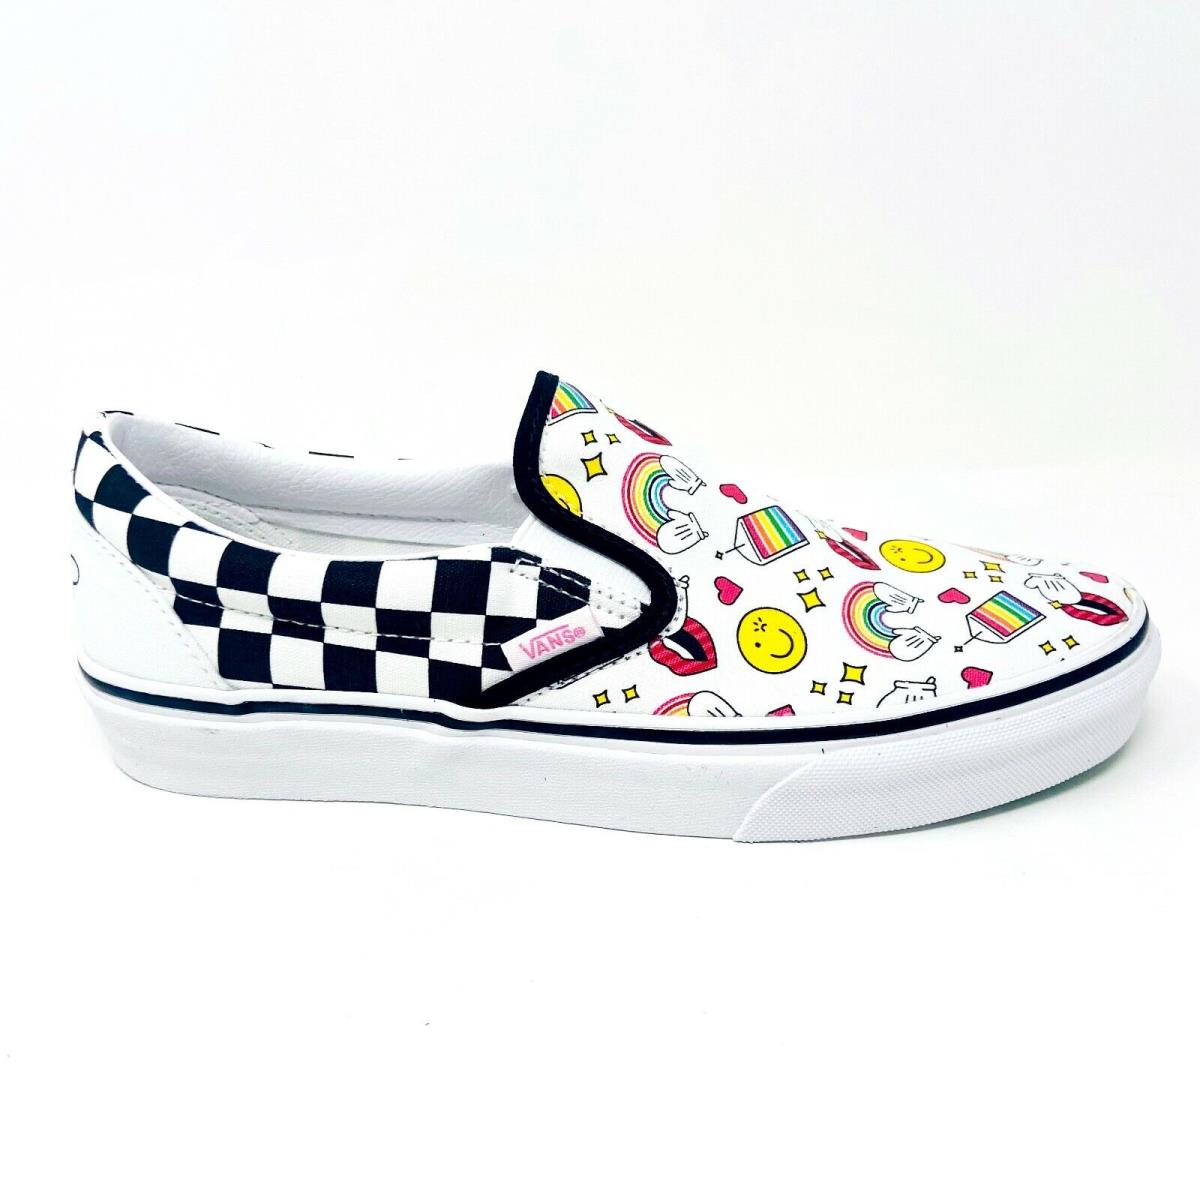 Vans Classic Slip On Flour Shop Icons Checkerboard Womens Casual Shoes